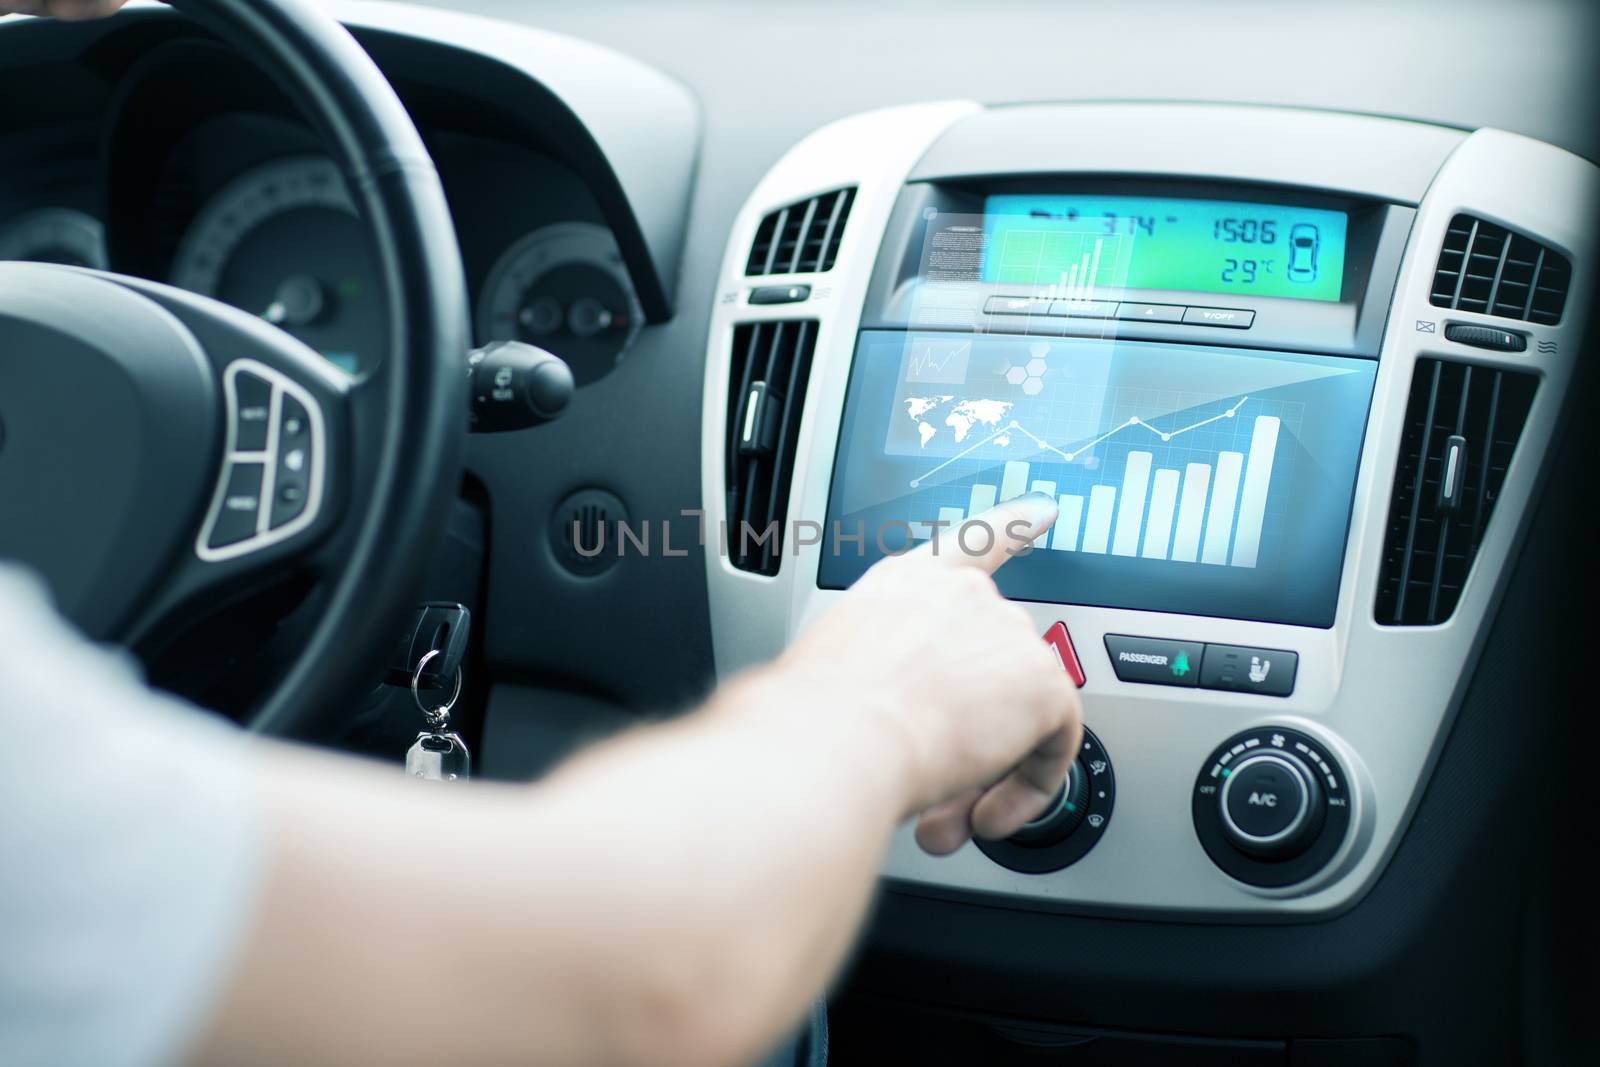 transportation and vehicle concept - man using car control panel